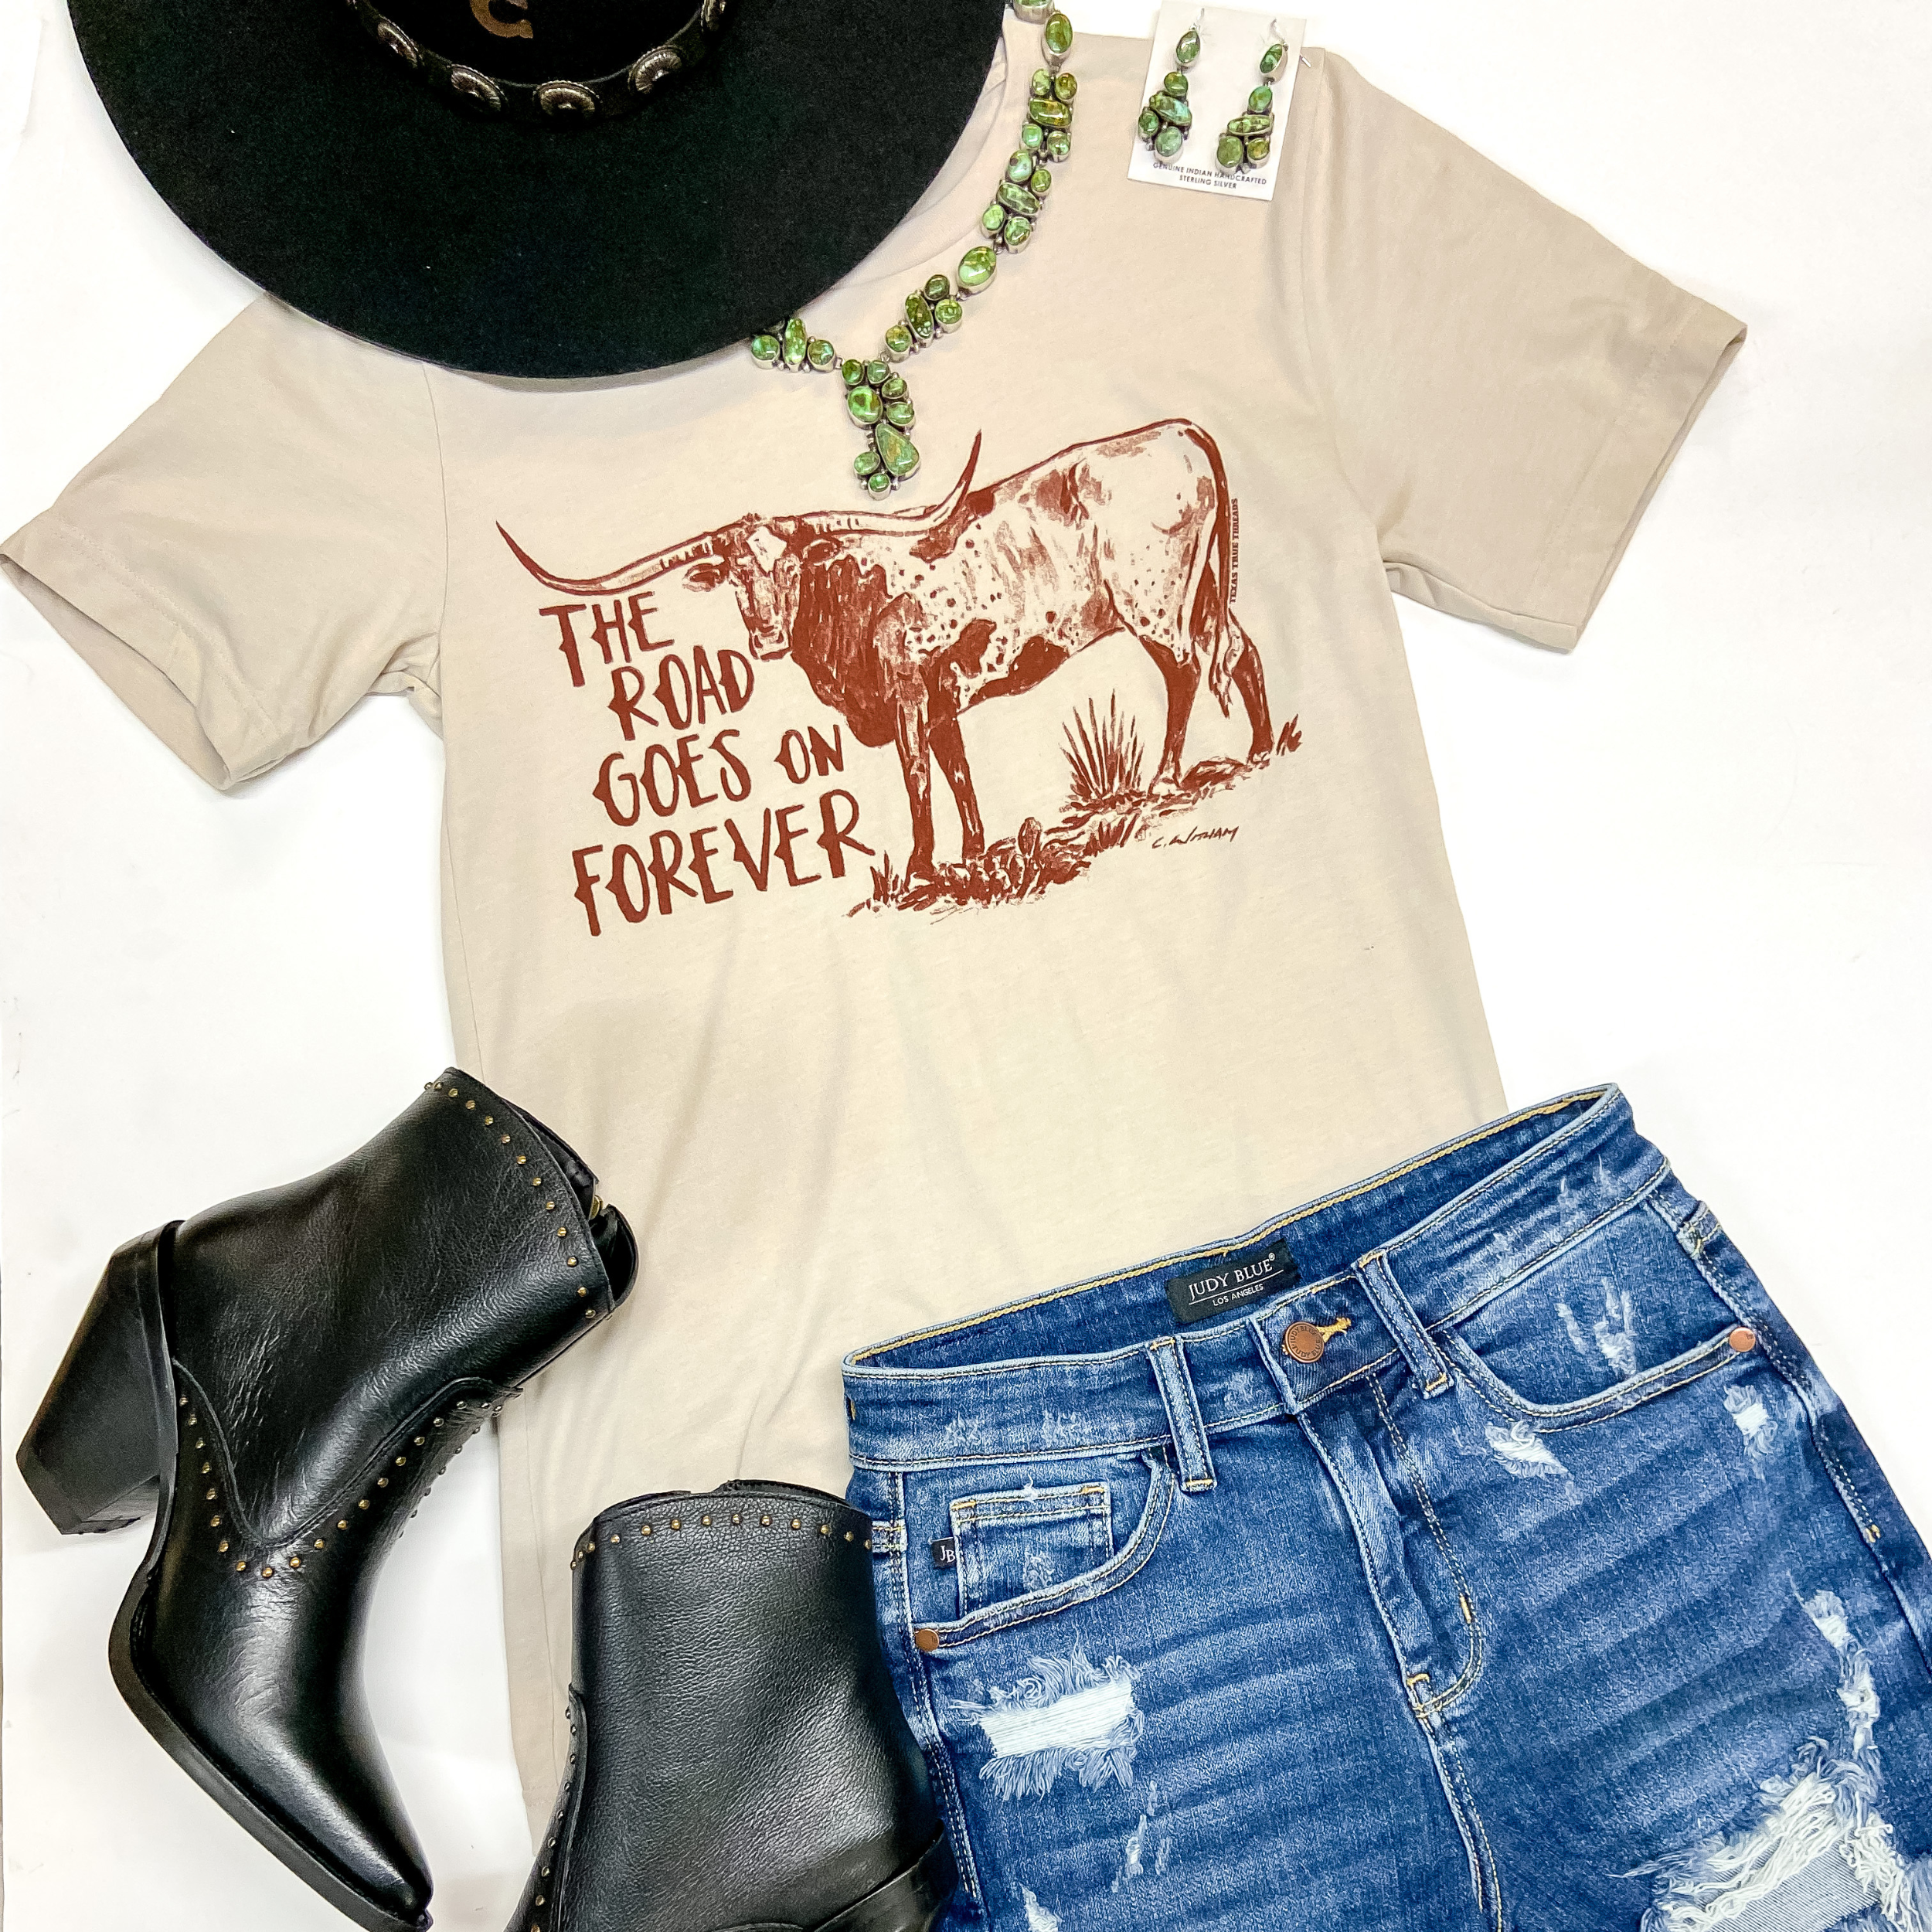 A beige short sleeve graphic tee with a long horn and the phrase "The Road Goes on Forever." This tee is pictured on a white background with denim shorts, black booties, and genuine turquoise jewelry.